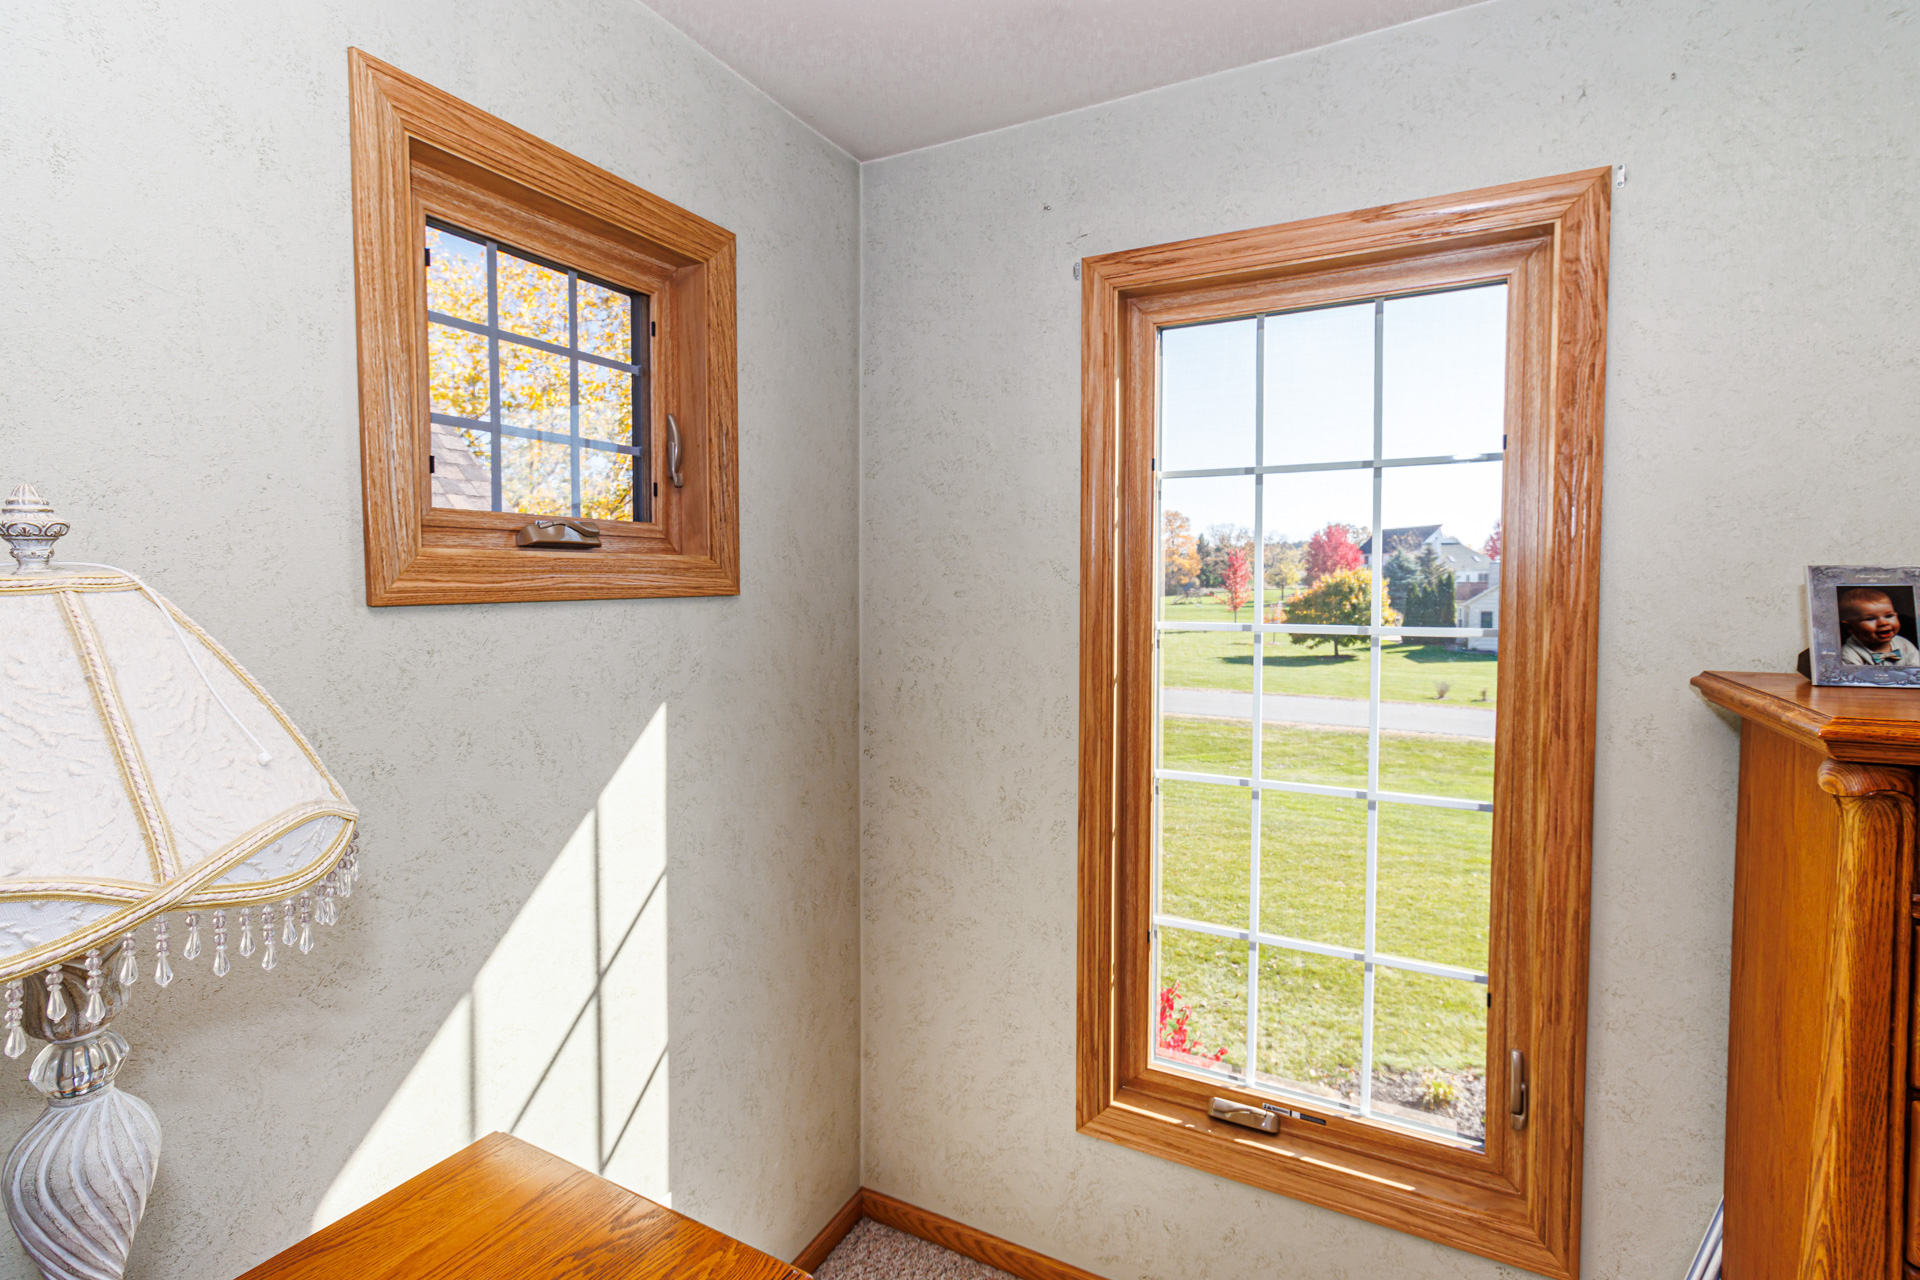 Great Lakes Casement Windows with Wood-Grain Interior